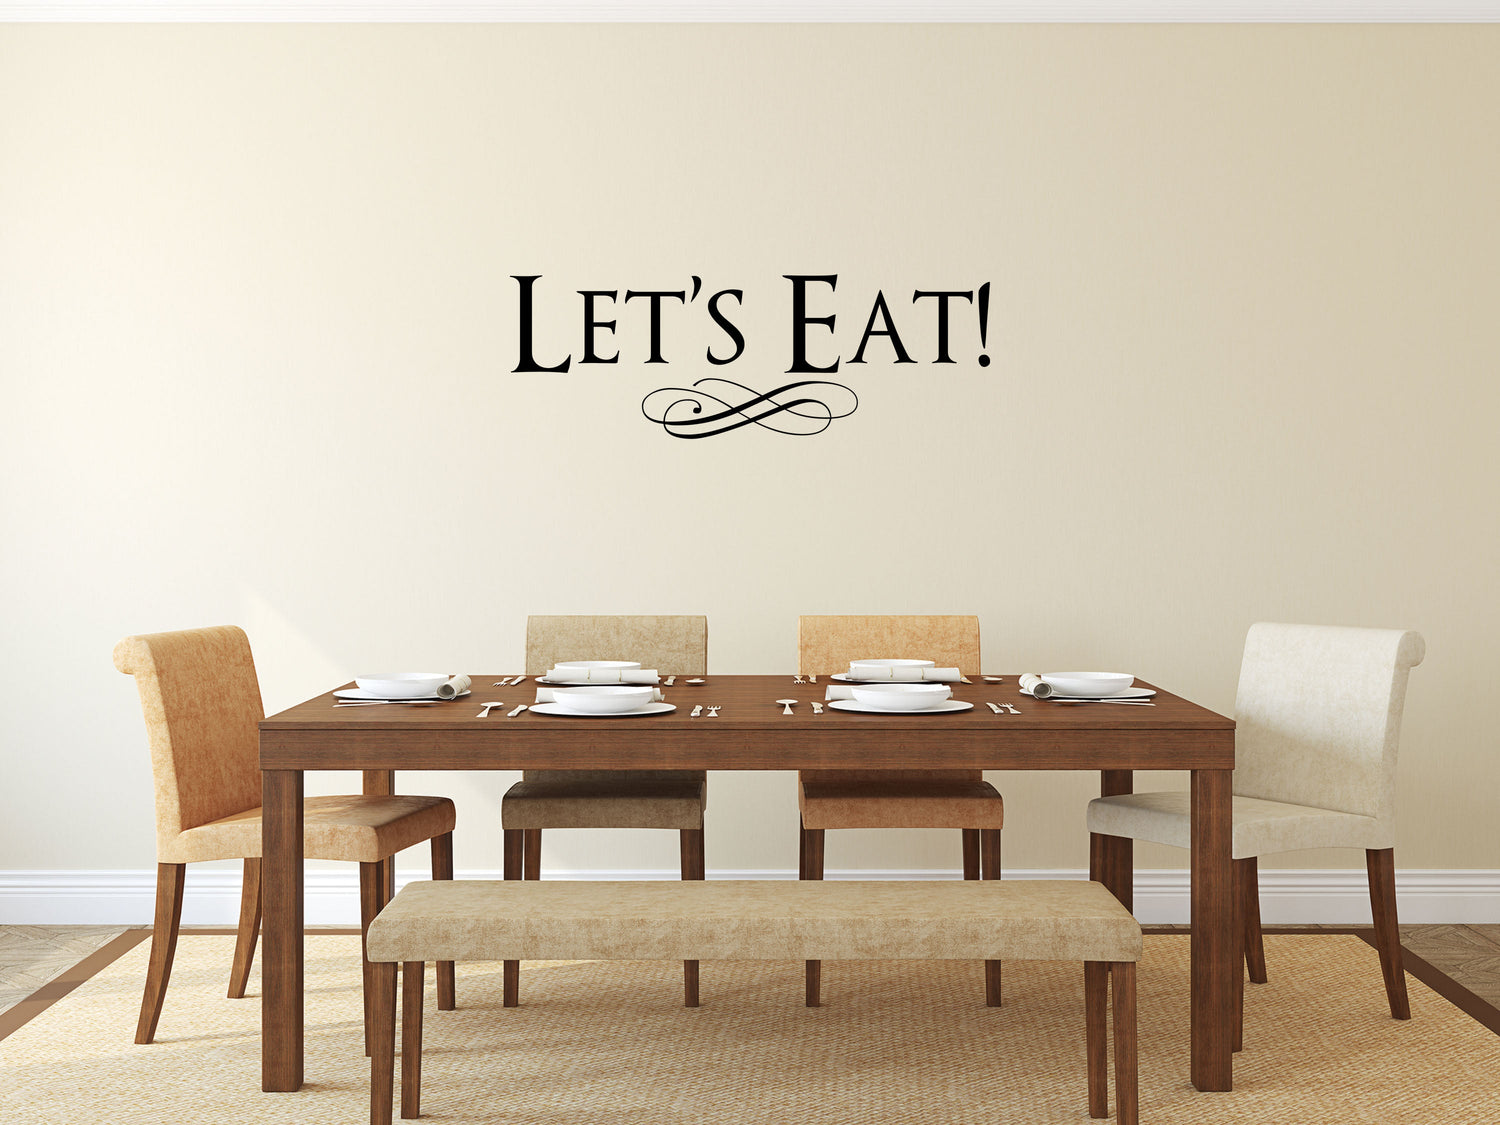 Let's Eat - Inspirational Wall Decals Vinyl Wall Decal Inspirational Wall Signs 